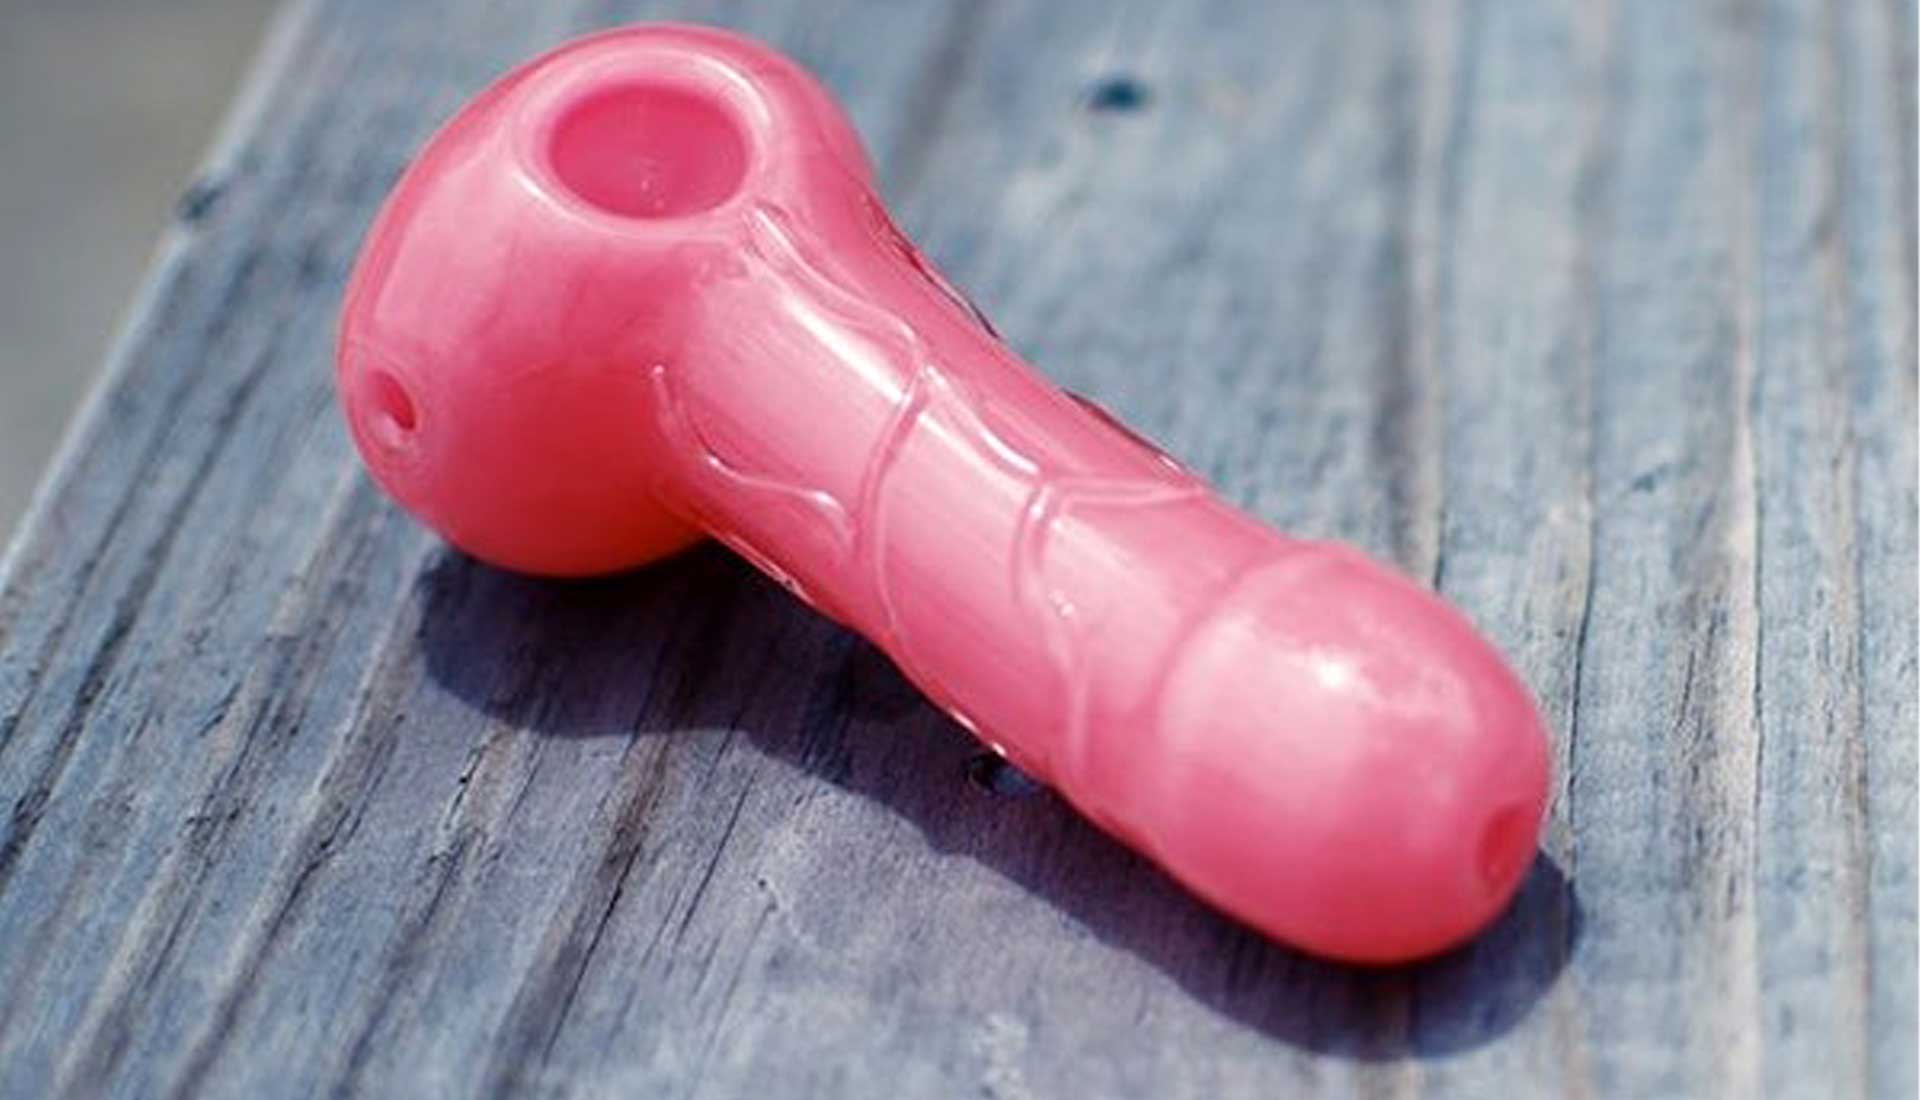 6 Penis Pipes for Gag Gifts and “Personal” Use